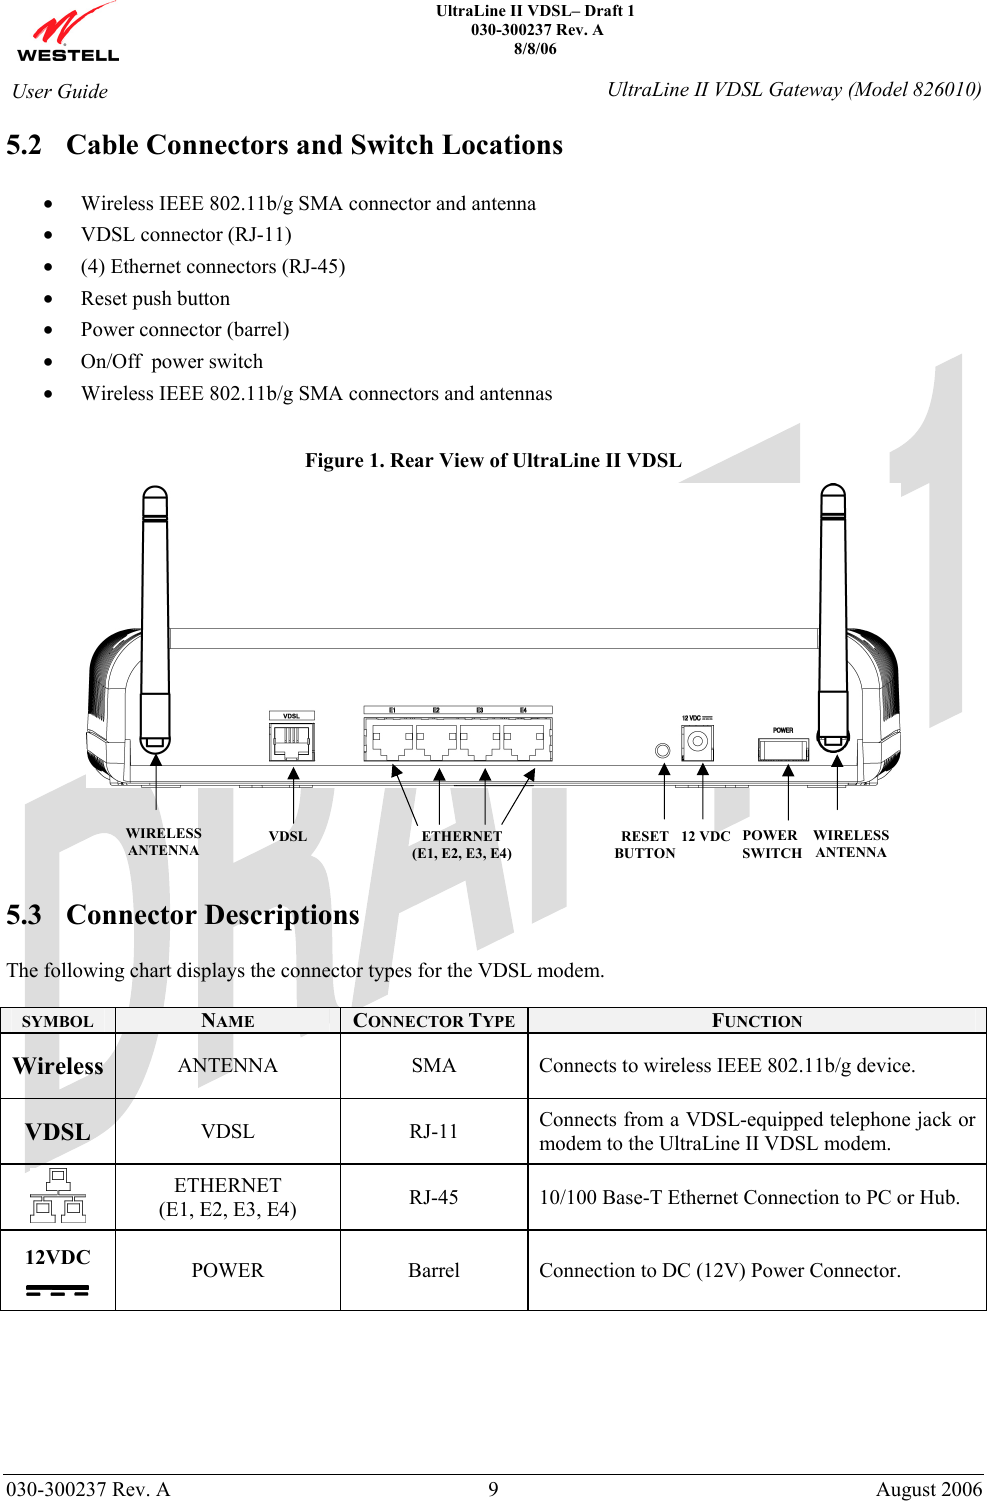    UltraLine II VDSL– Draft 1  030-300237 Rev. A 8/8/06   030-300237 Rev. A  9  August 2006  User Guide  UltraLine II VDSL Gateway (Model 826010) 5.2 Cable Connectors and Switch Locations  • Wireless IEEE 802.11b/g SMA connector and antenna • VDSL connector (RJ-11) • (4) Ethernet connectors (RJ-45) • Reset push button • Power connector (barrel) • On/Off  power switch • Wireless IEEE 802.11b/g SMA connectors and antennas  Figure 1. Rear View of UltraLine II VDSL     5.3 Connector Descriptions  The following chart displays the connector types for the VDSL modem.   SYMBOL  NAME  CONNECTOR TYPE  FUNCTION Wireless  ANTENNA  SMA   Connects to wireless IEEE 802.11b/g device. VDSL  VDSL RJ-11 Connects from a VDSL-equipped telephone jack or  modem to the UltraLine II VDSL modem.   ETHERNET (E1, E2, E3, E4)  RJ-45  10/100 Base-T Ethernet Connection to PC or Hub.  12VDC   POWER  Barrel  Connection to DC (12V) Power Connector.    ETHERNET (E1, E2, E3, E4) 12 VDC  POWER SWITCH RESET BUTTON WIRELESSANTENNA VDSL WIRELESS ANTENNA 